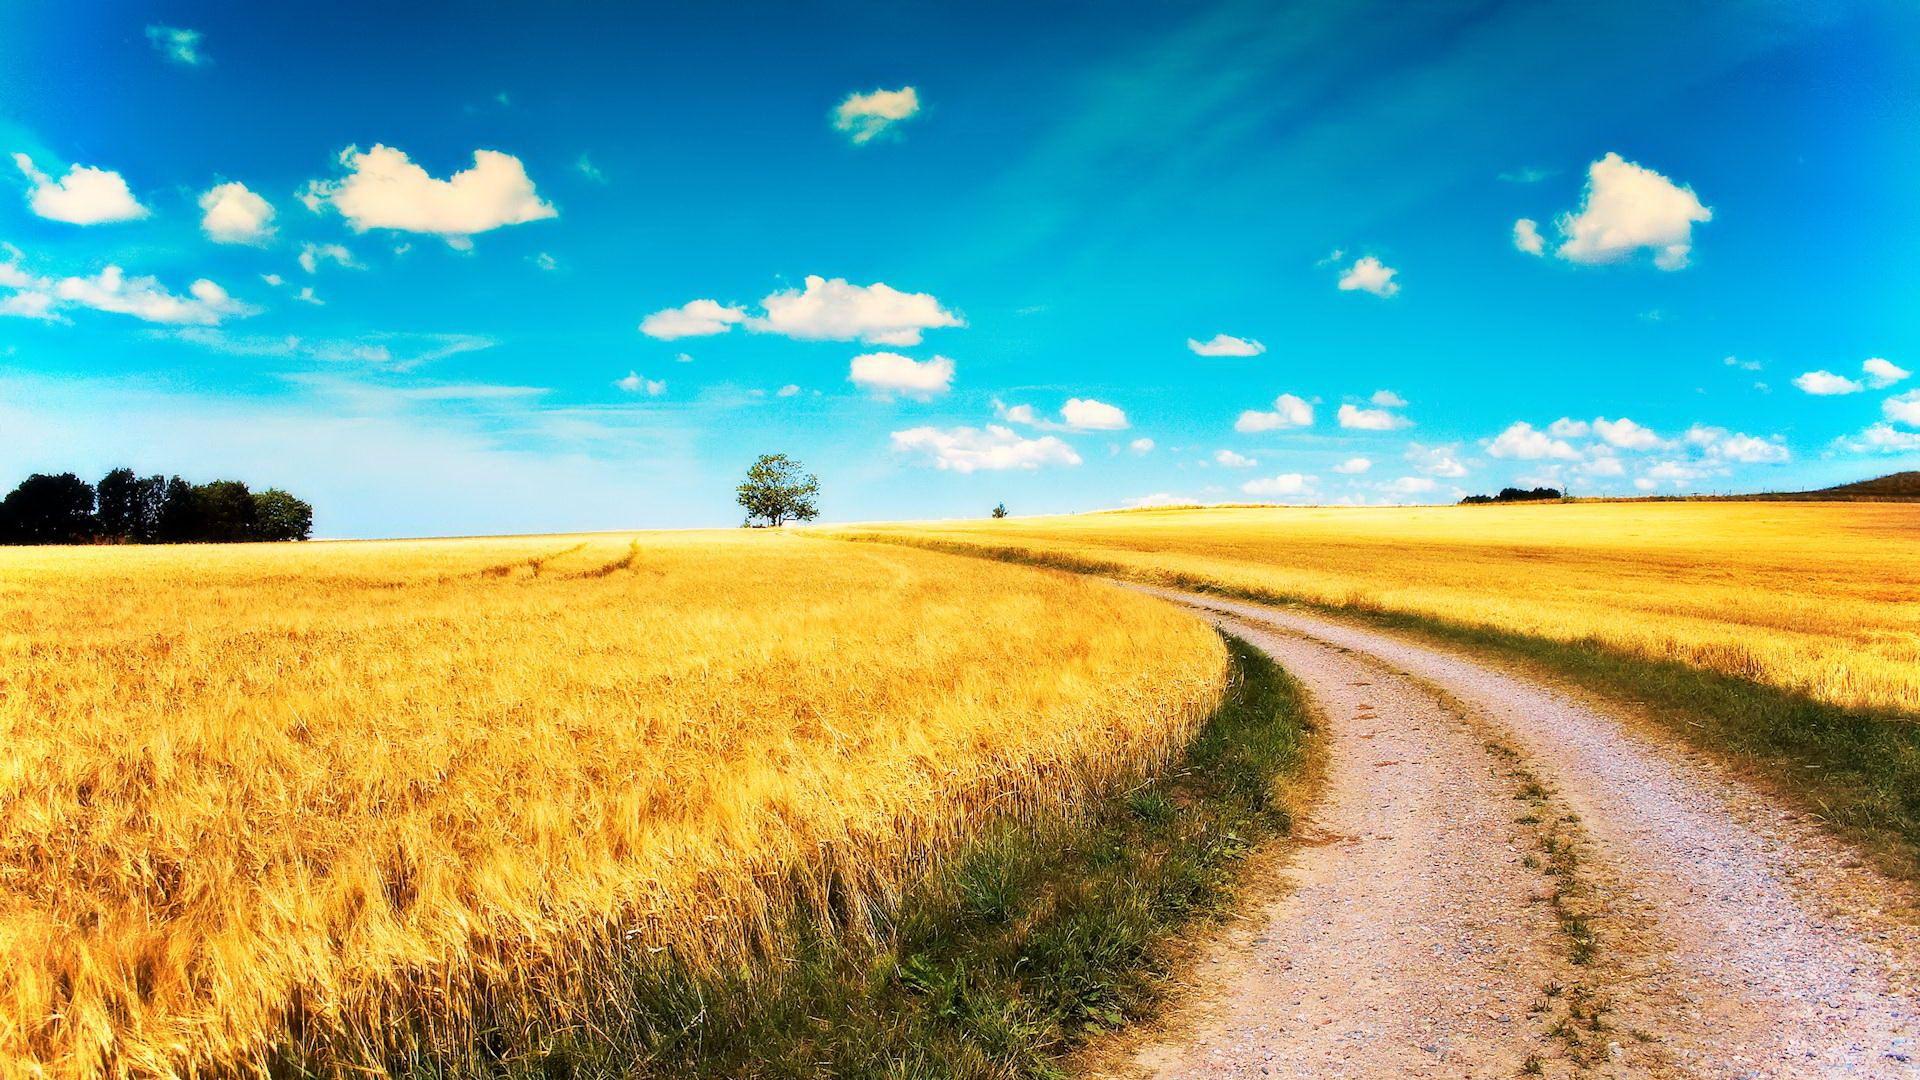 Country Road Wallpaper 7125 1920 x 1080